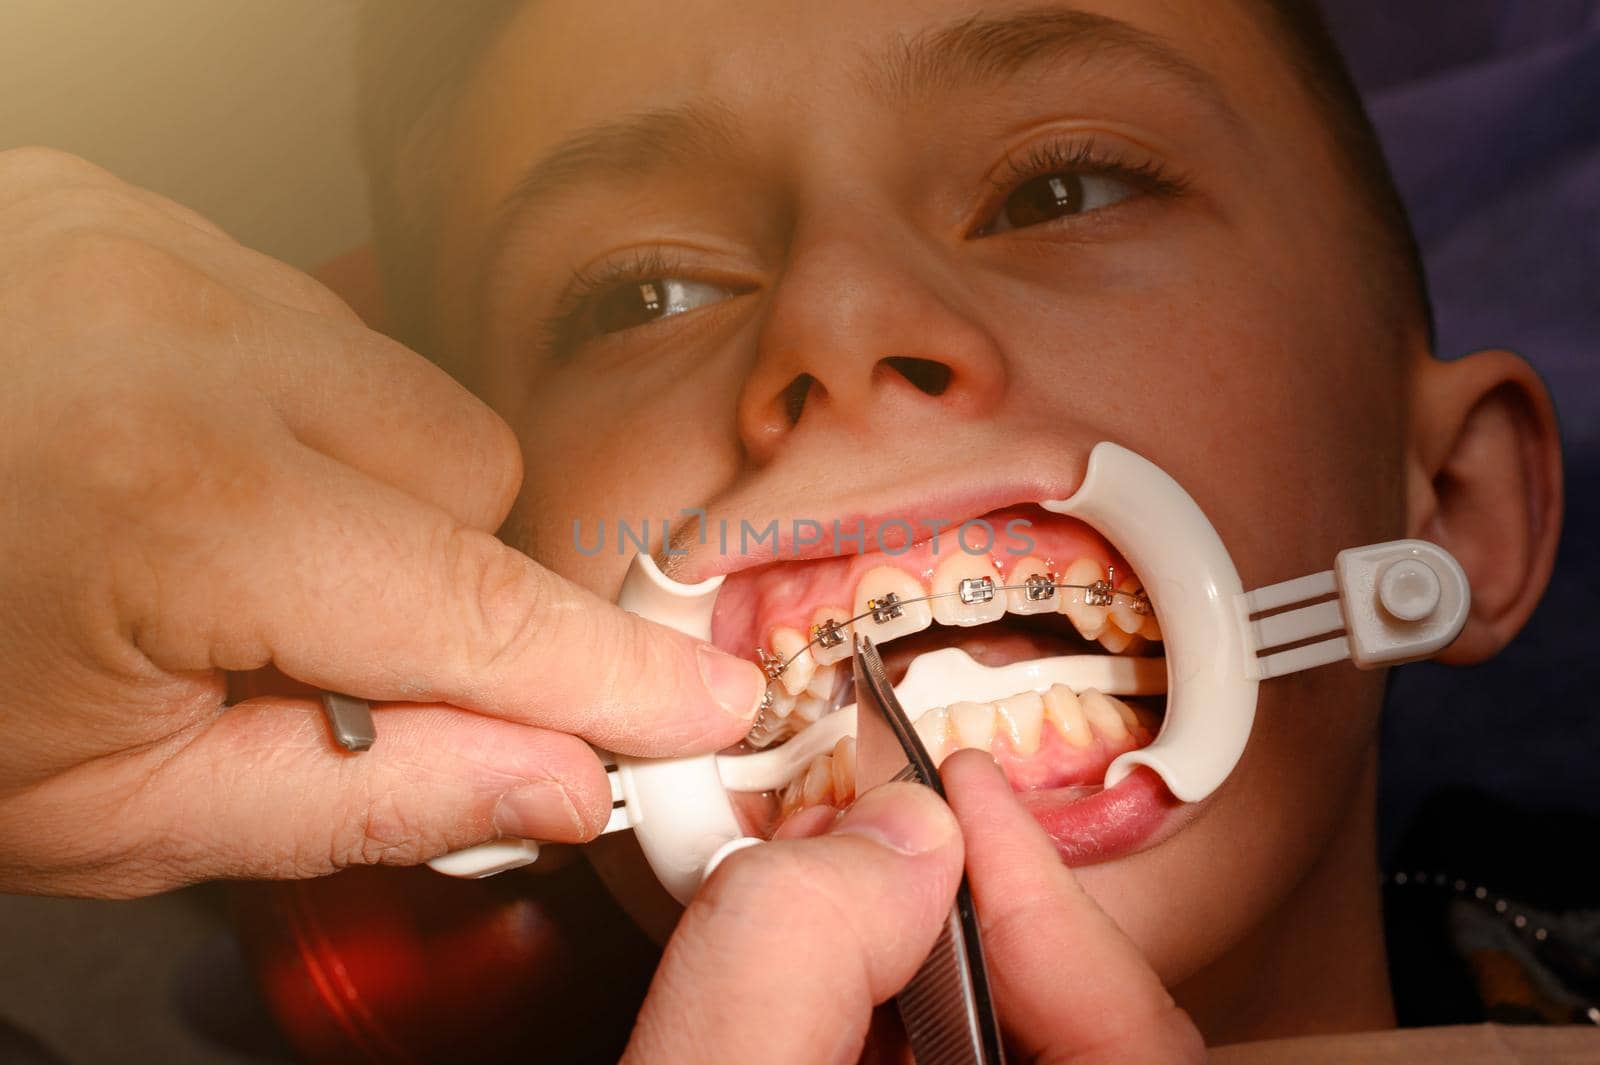 The teenager's boy is glued braces on his upper teeth to straighten them, the boy has a retractor on his lips, a hook for straightening braces.